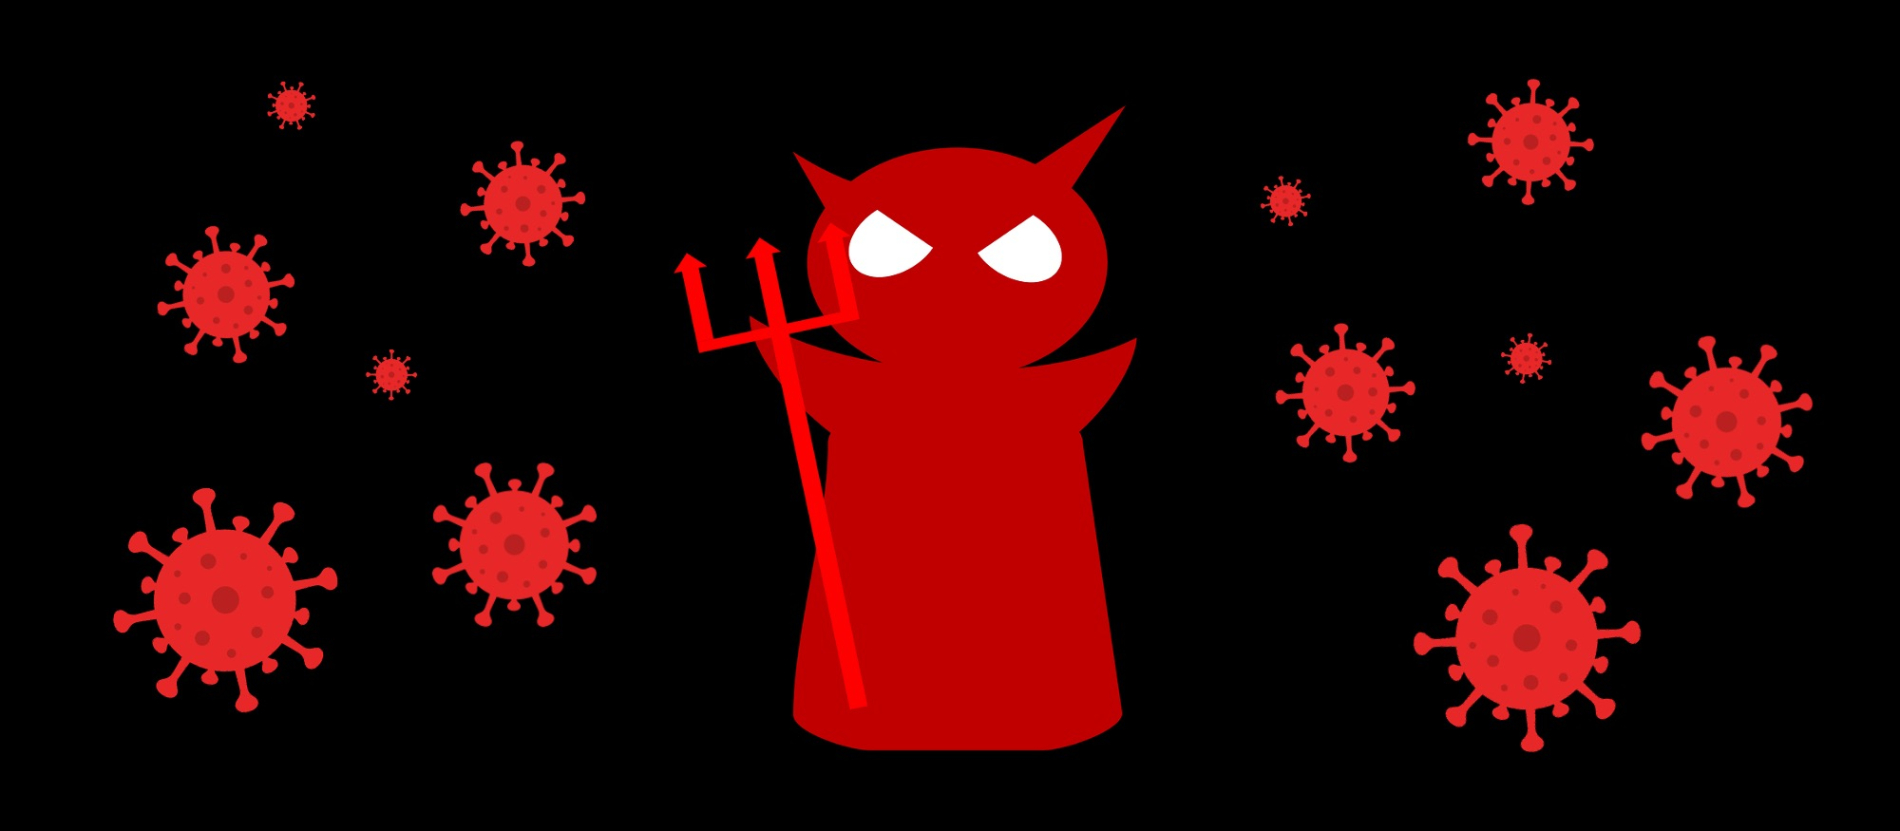 red devil clipart surrounded by red viruses